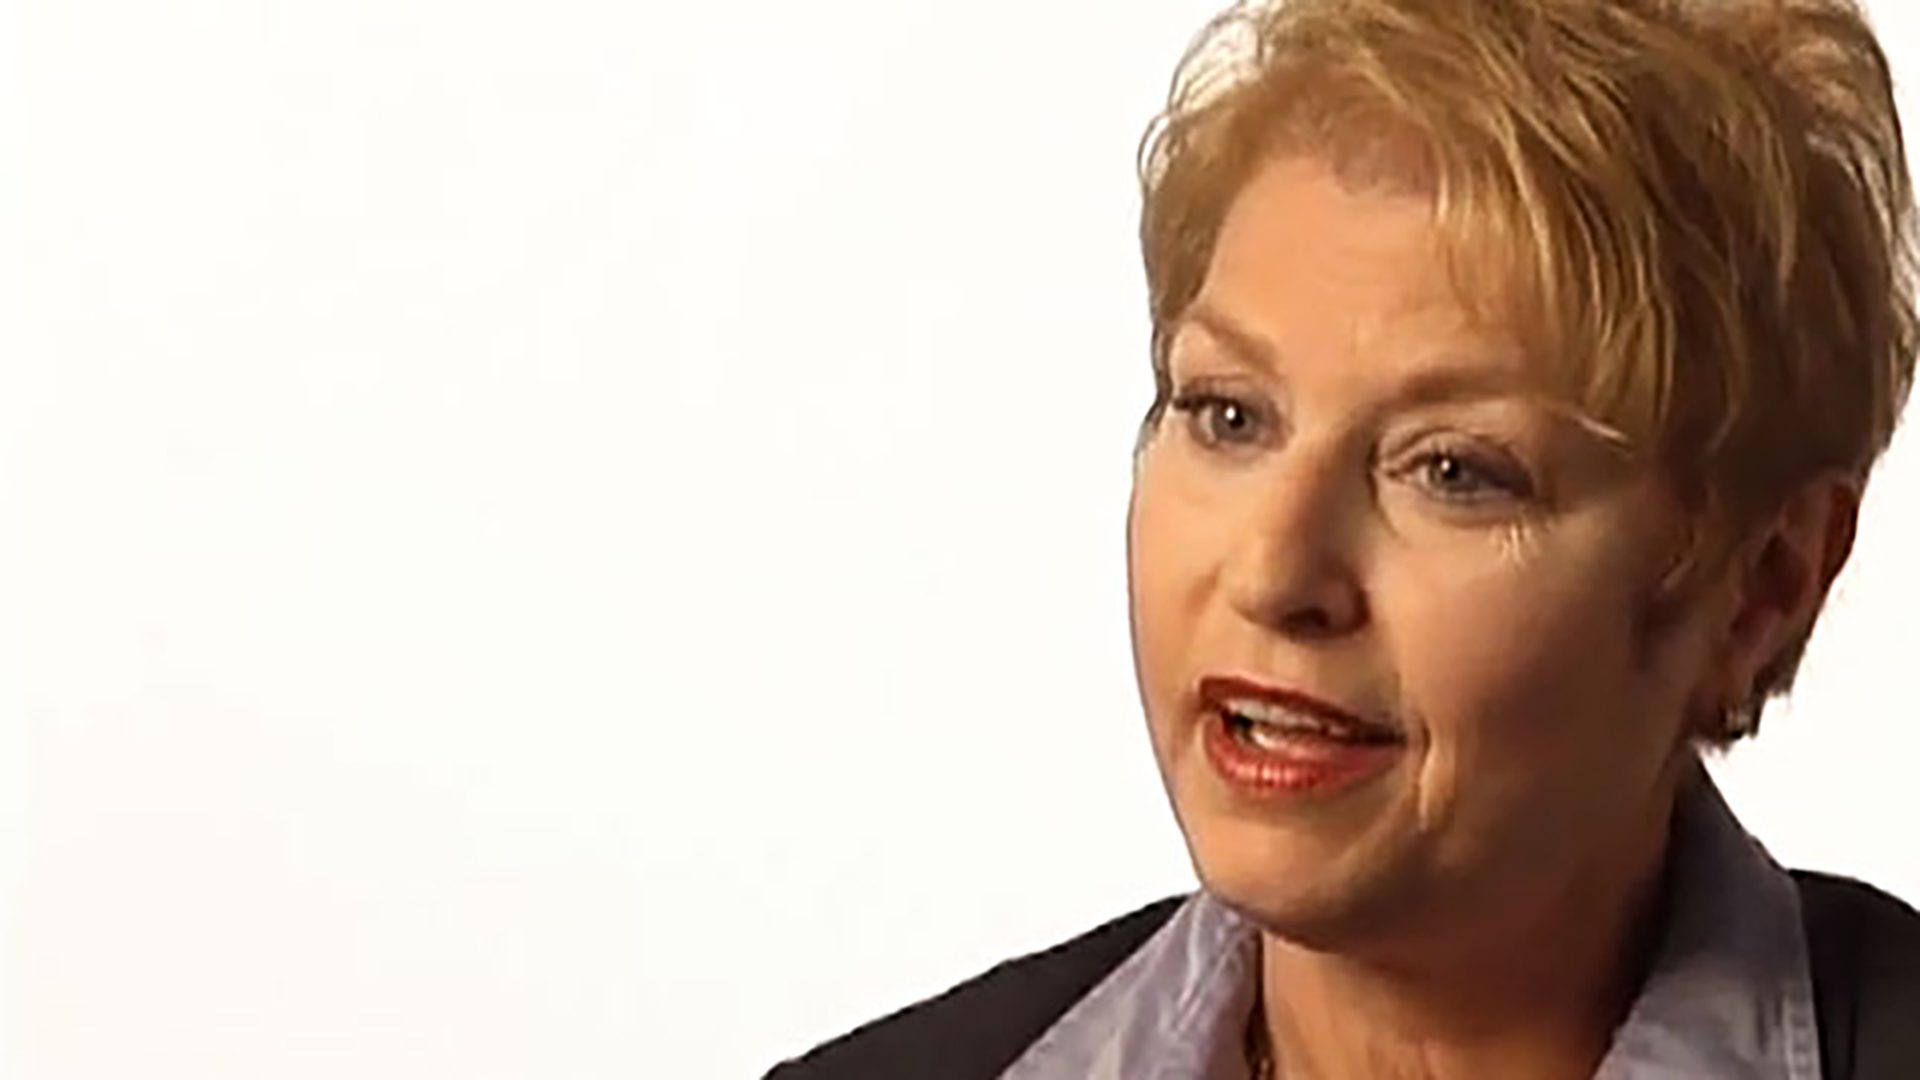 A middle-aged woman with short blonde hair is interviewed against a white background.